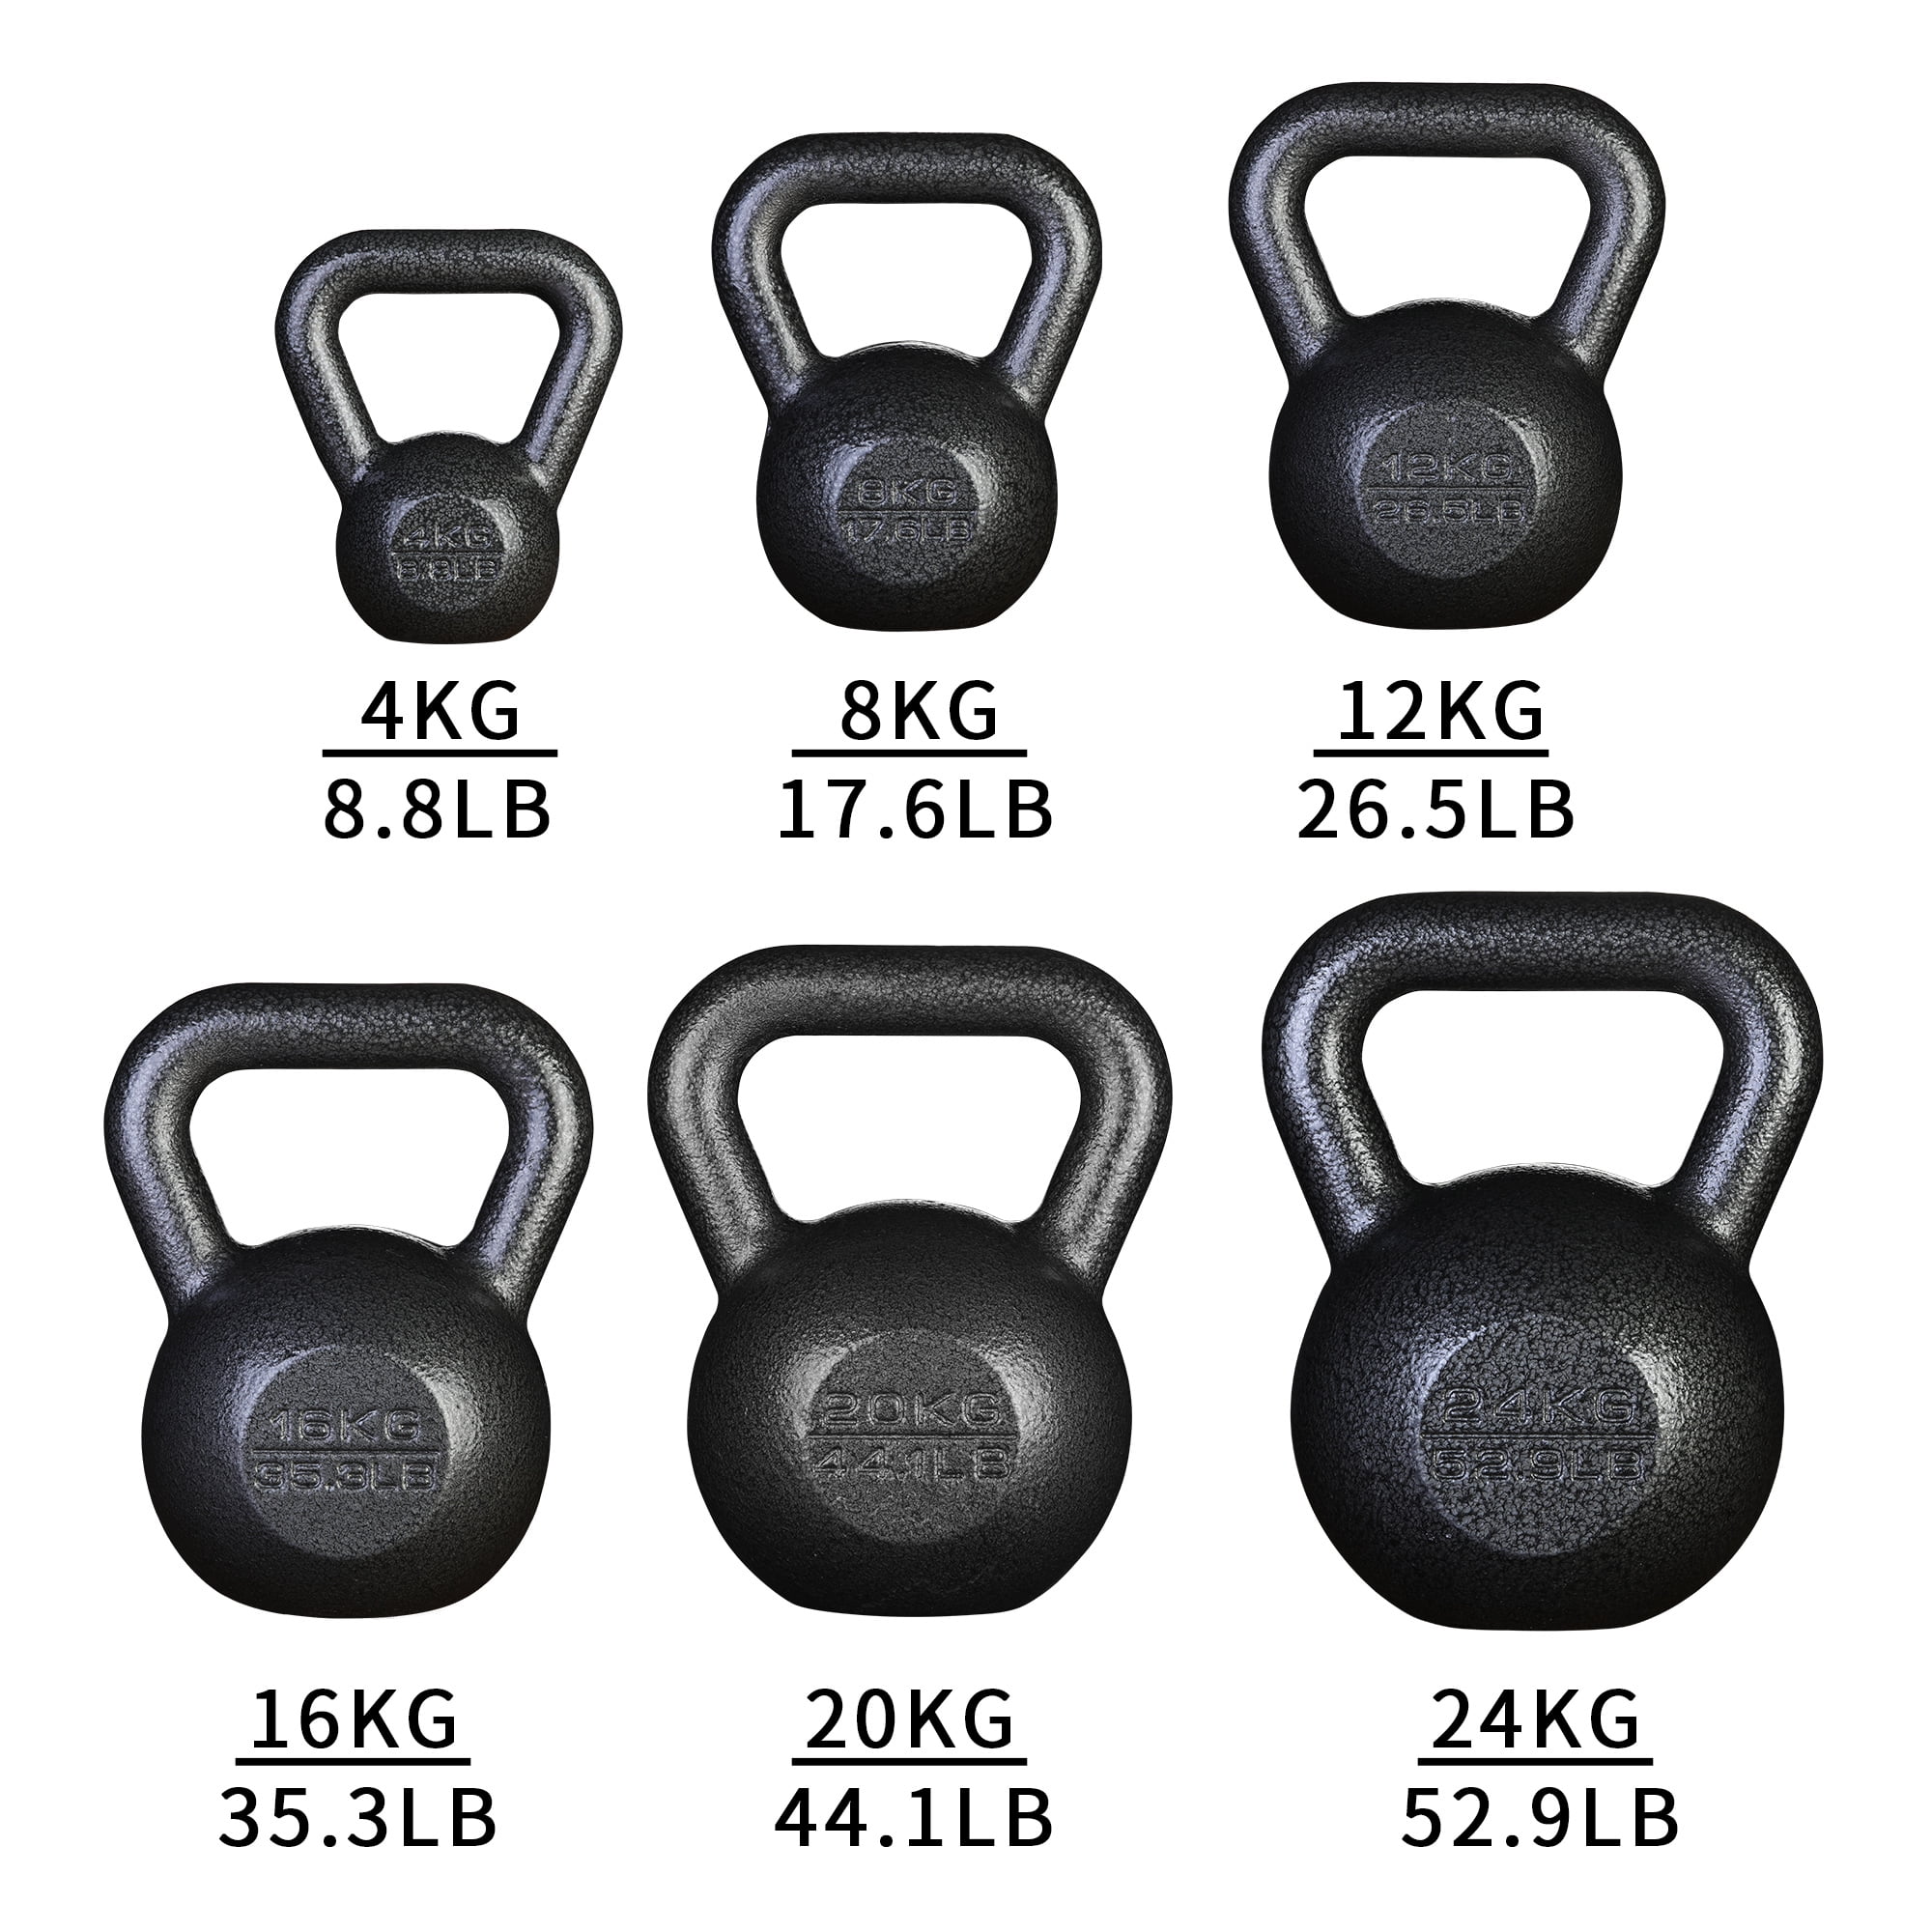 24kg Chase Fitness Cast Iron Kettlebell for Strength and Cardio Home Gym Training 6kg 